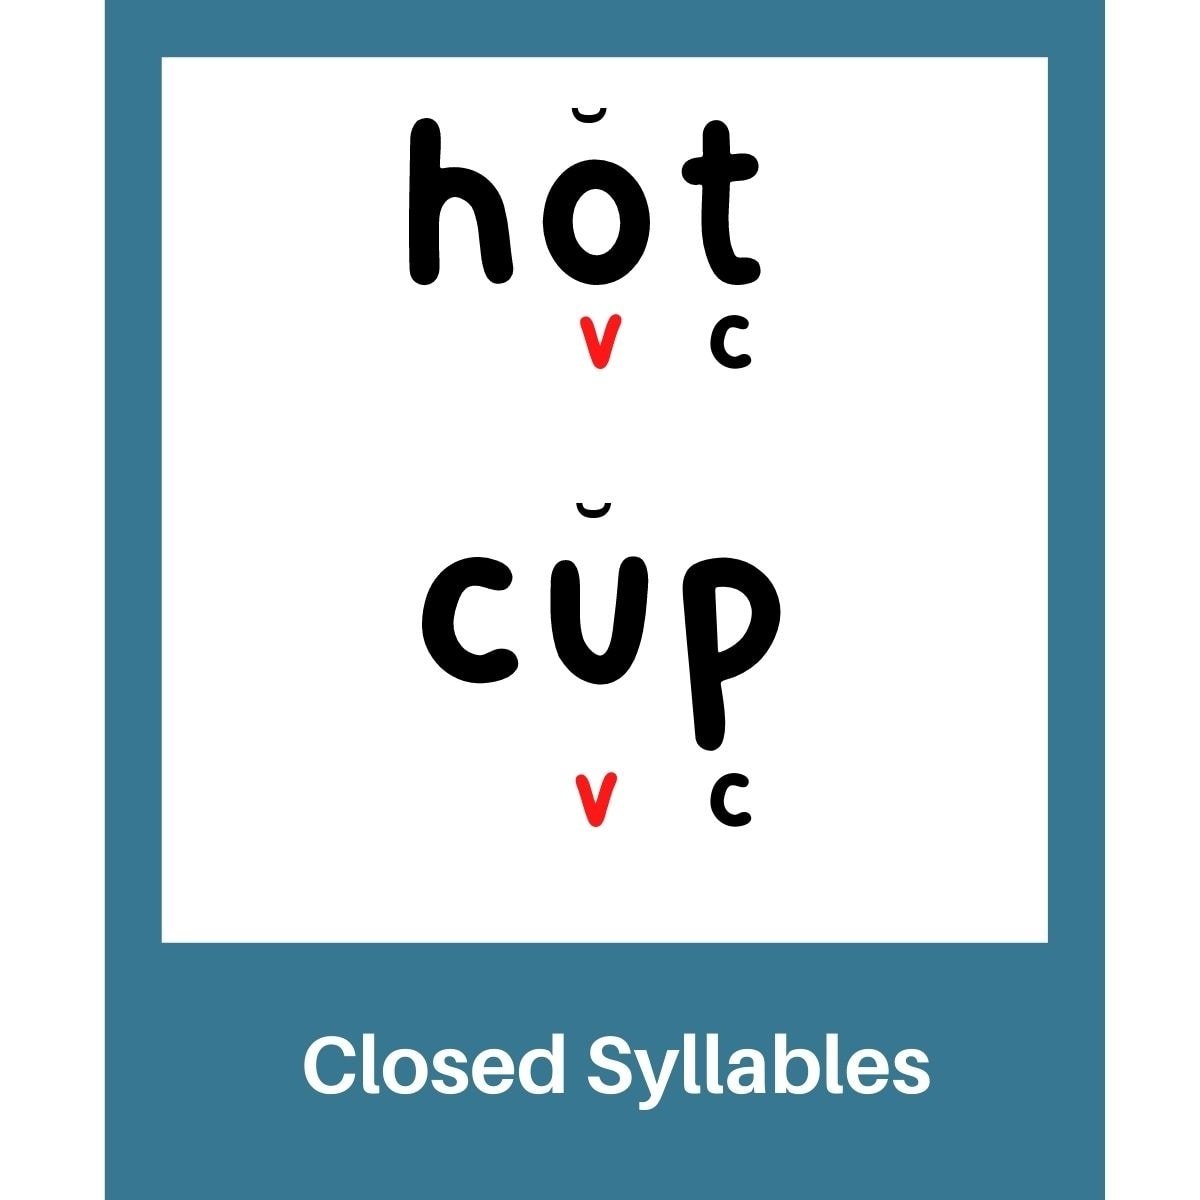 Words "hot" "cup" coded for vowels/consonants with breve marks above the vowel.